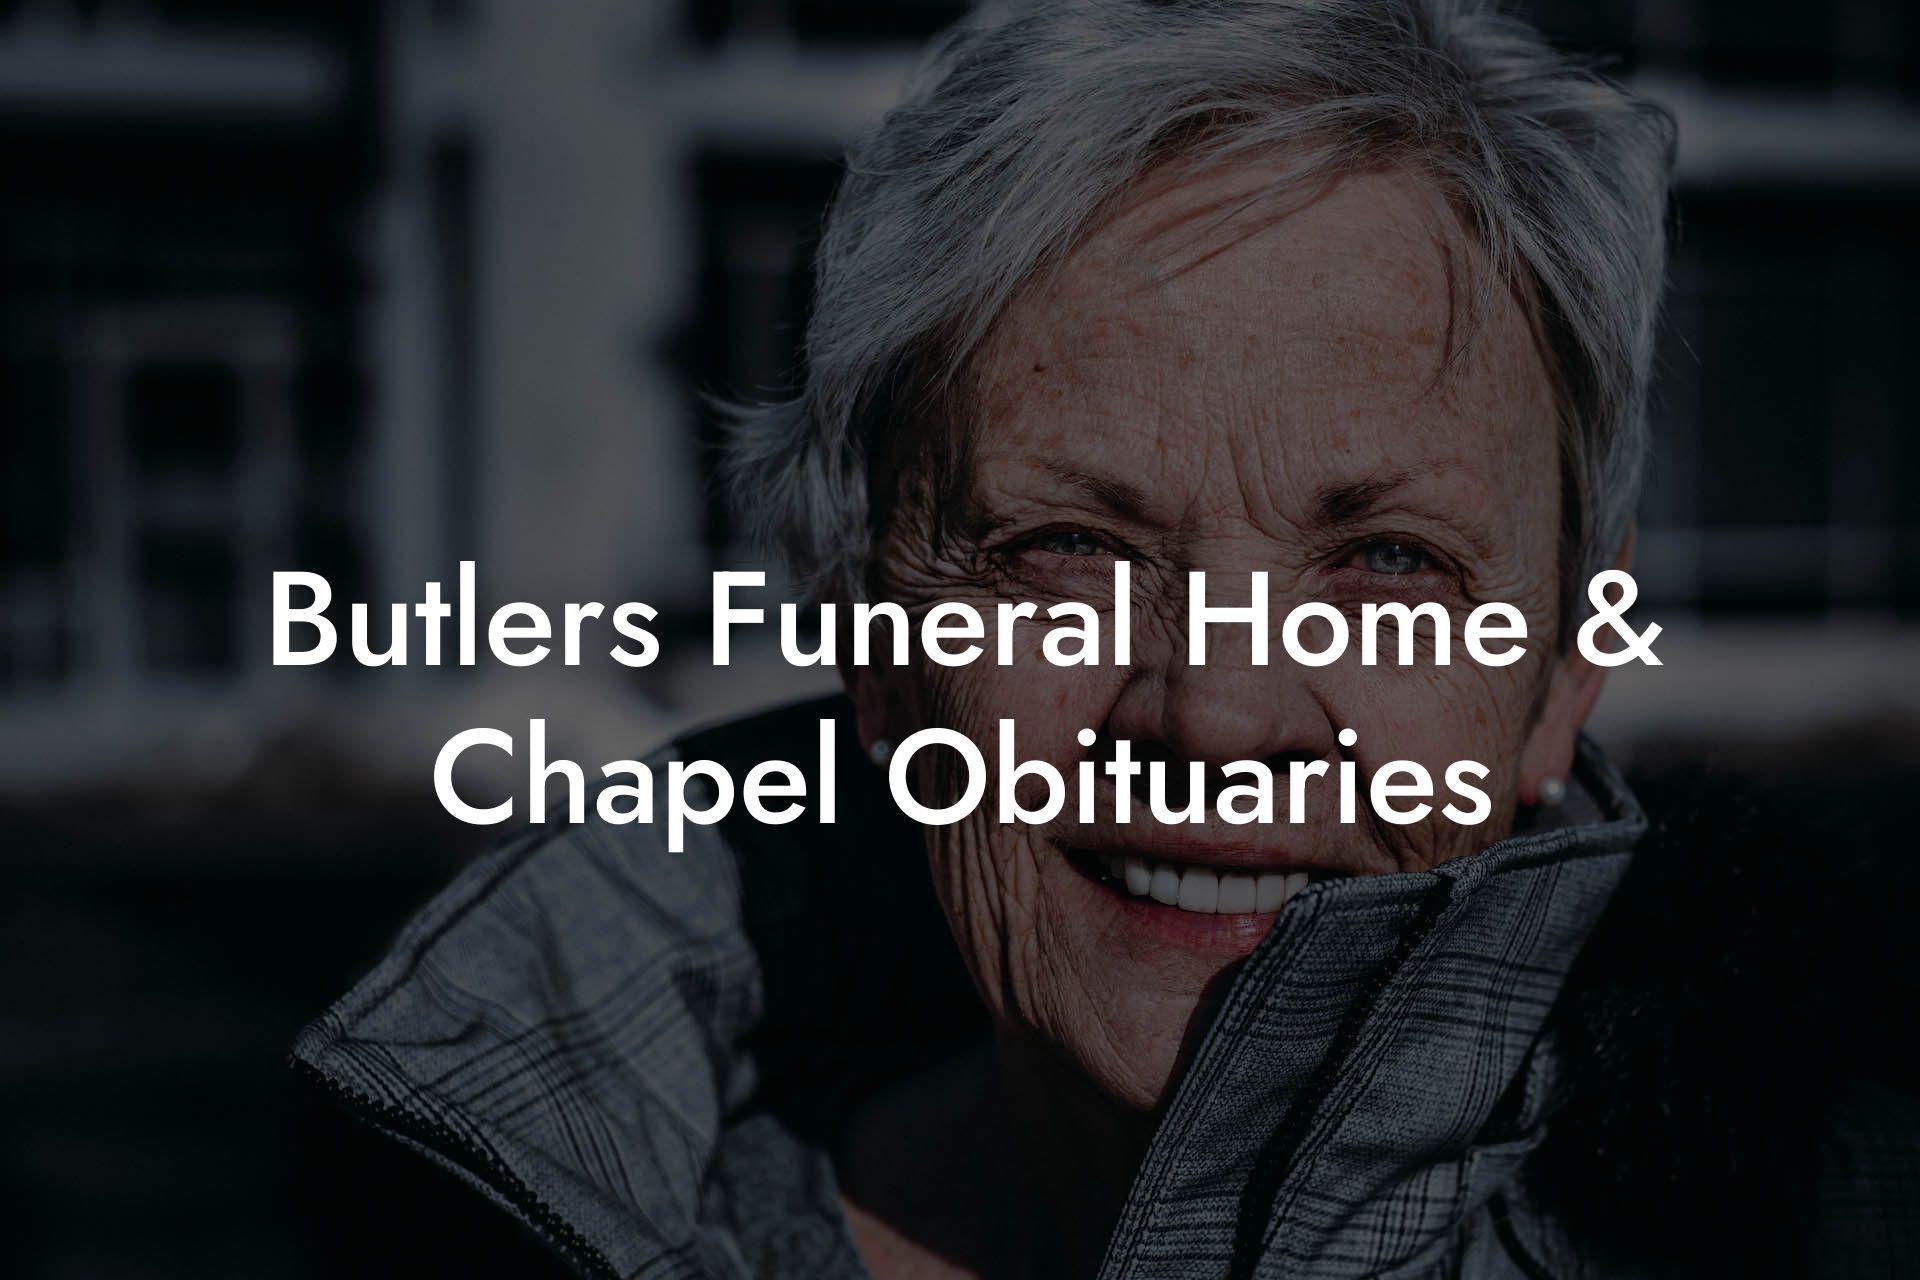 Butlers Funeral Home & Chapel Obituaries - Eulogy Assistant